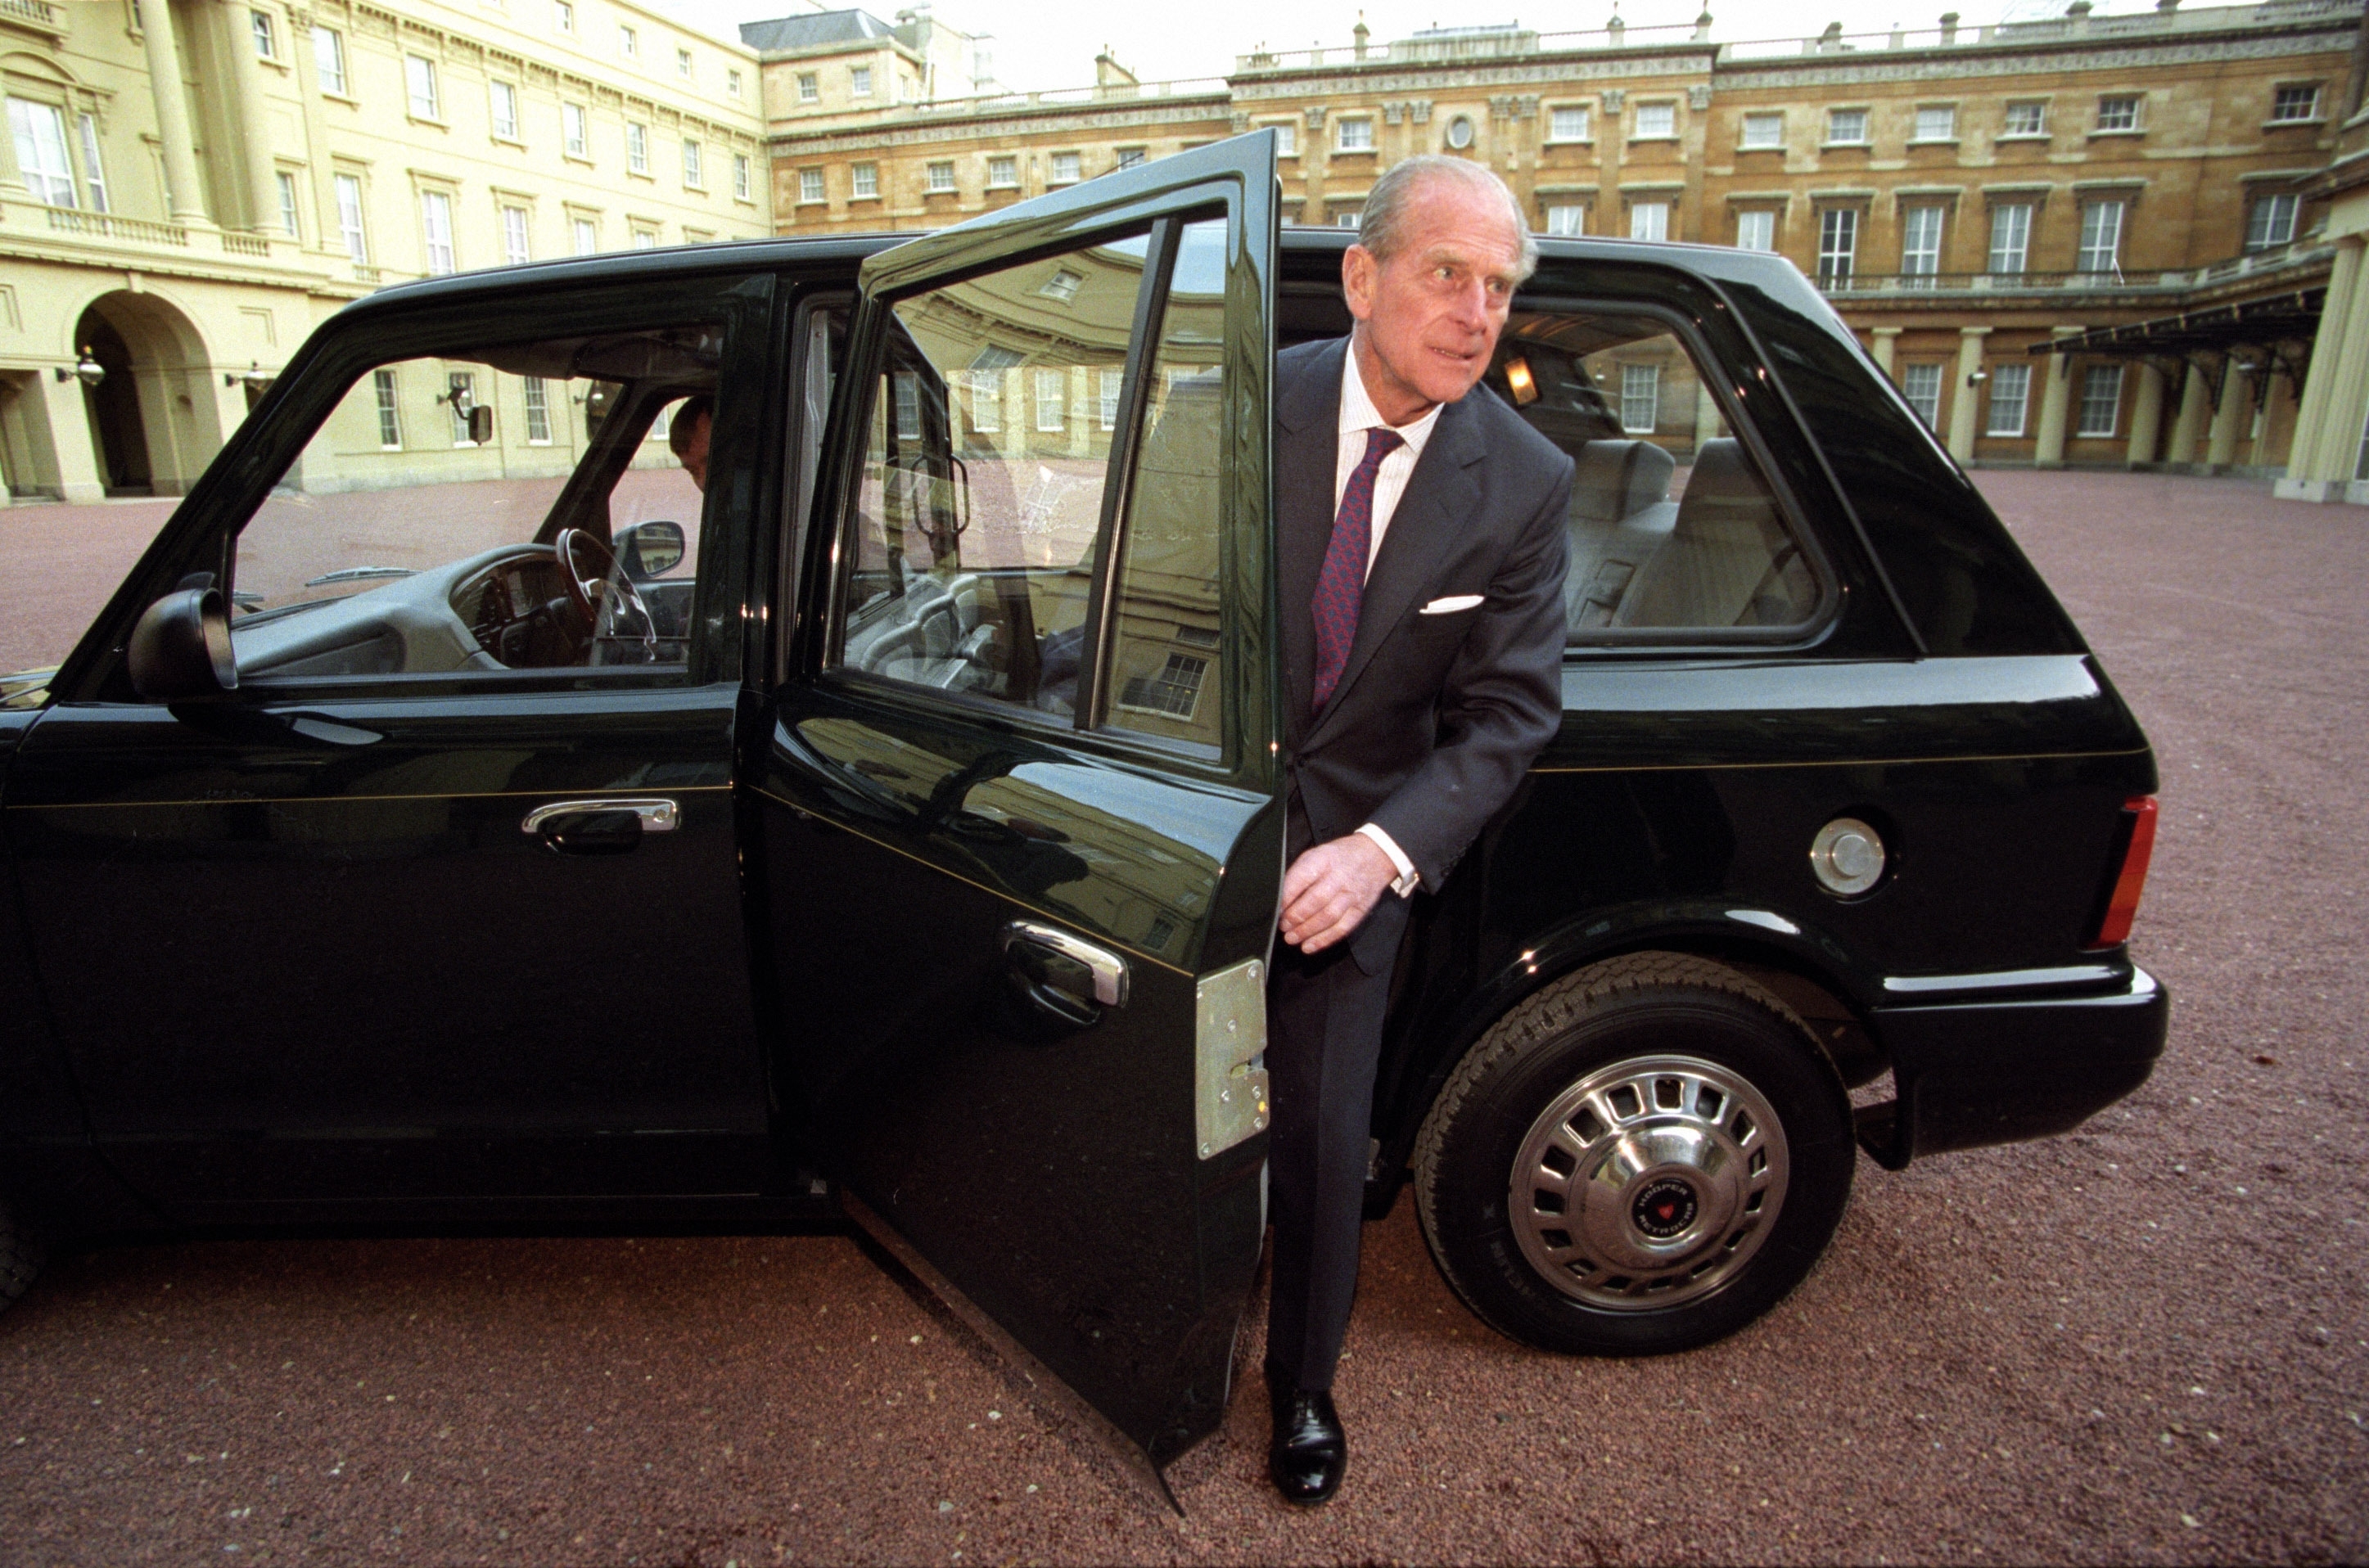 The Duke of Edinburgh with his Metrocab taxi at Buckingham Palace in London as the eco-friendly taxi will go on display after almost two decades of royal service.